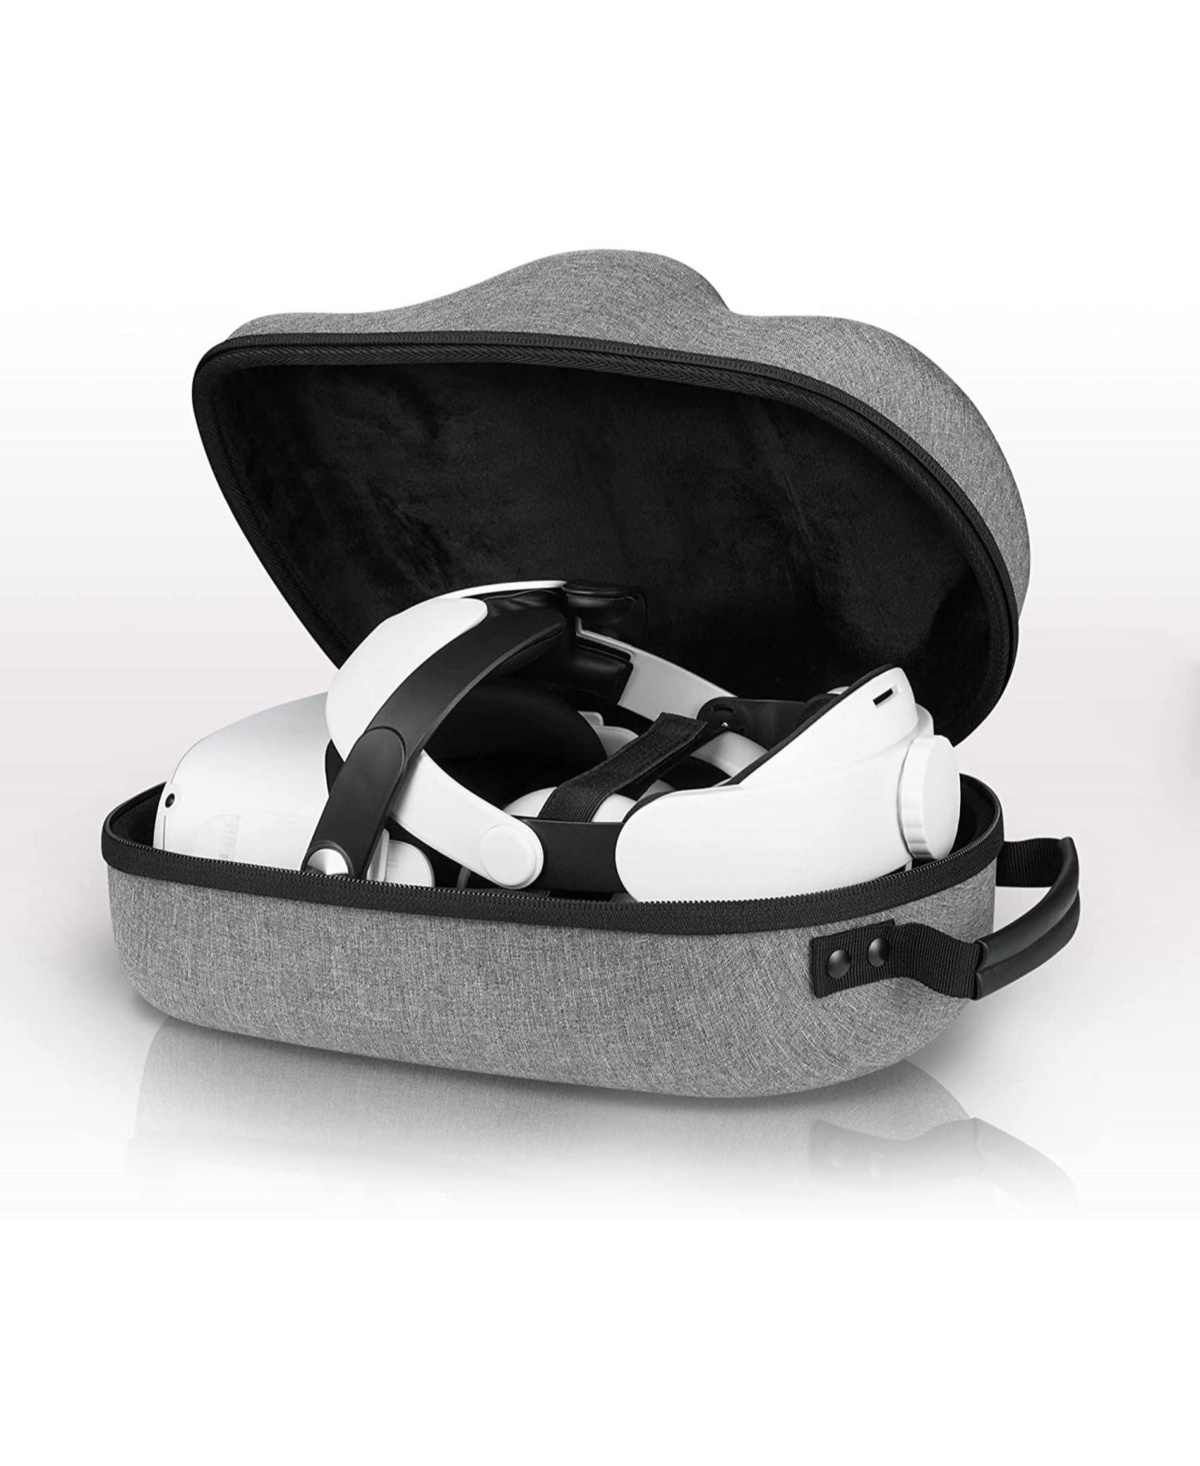 Wasserstein Vr Headset Carrying Case, Head Strap, and Face Cover Bundle - Gaming Accessories for Meta/Oculus Quest 2